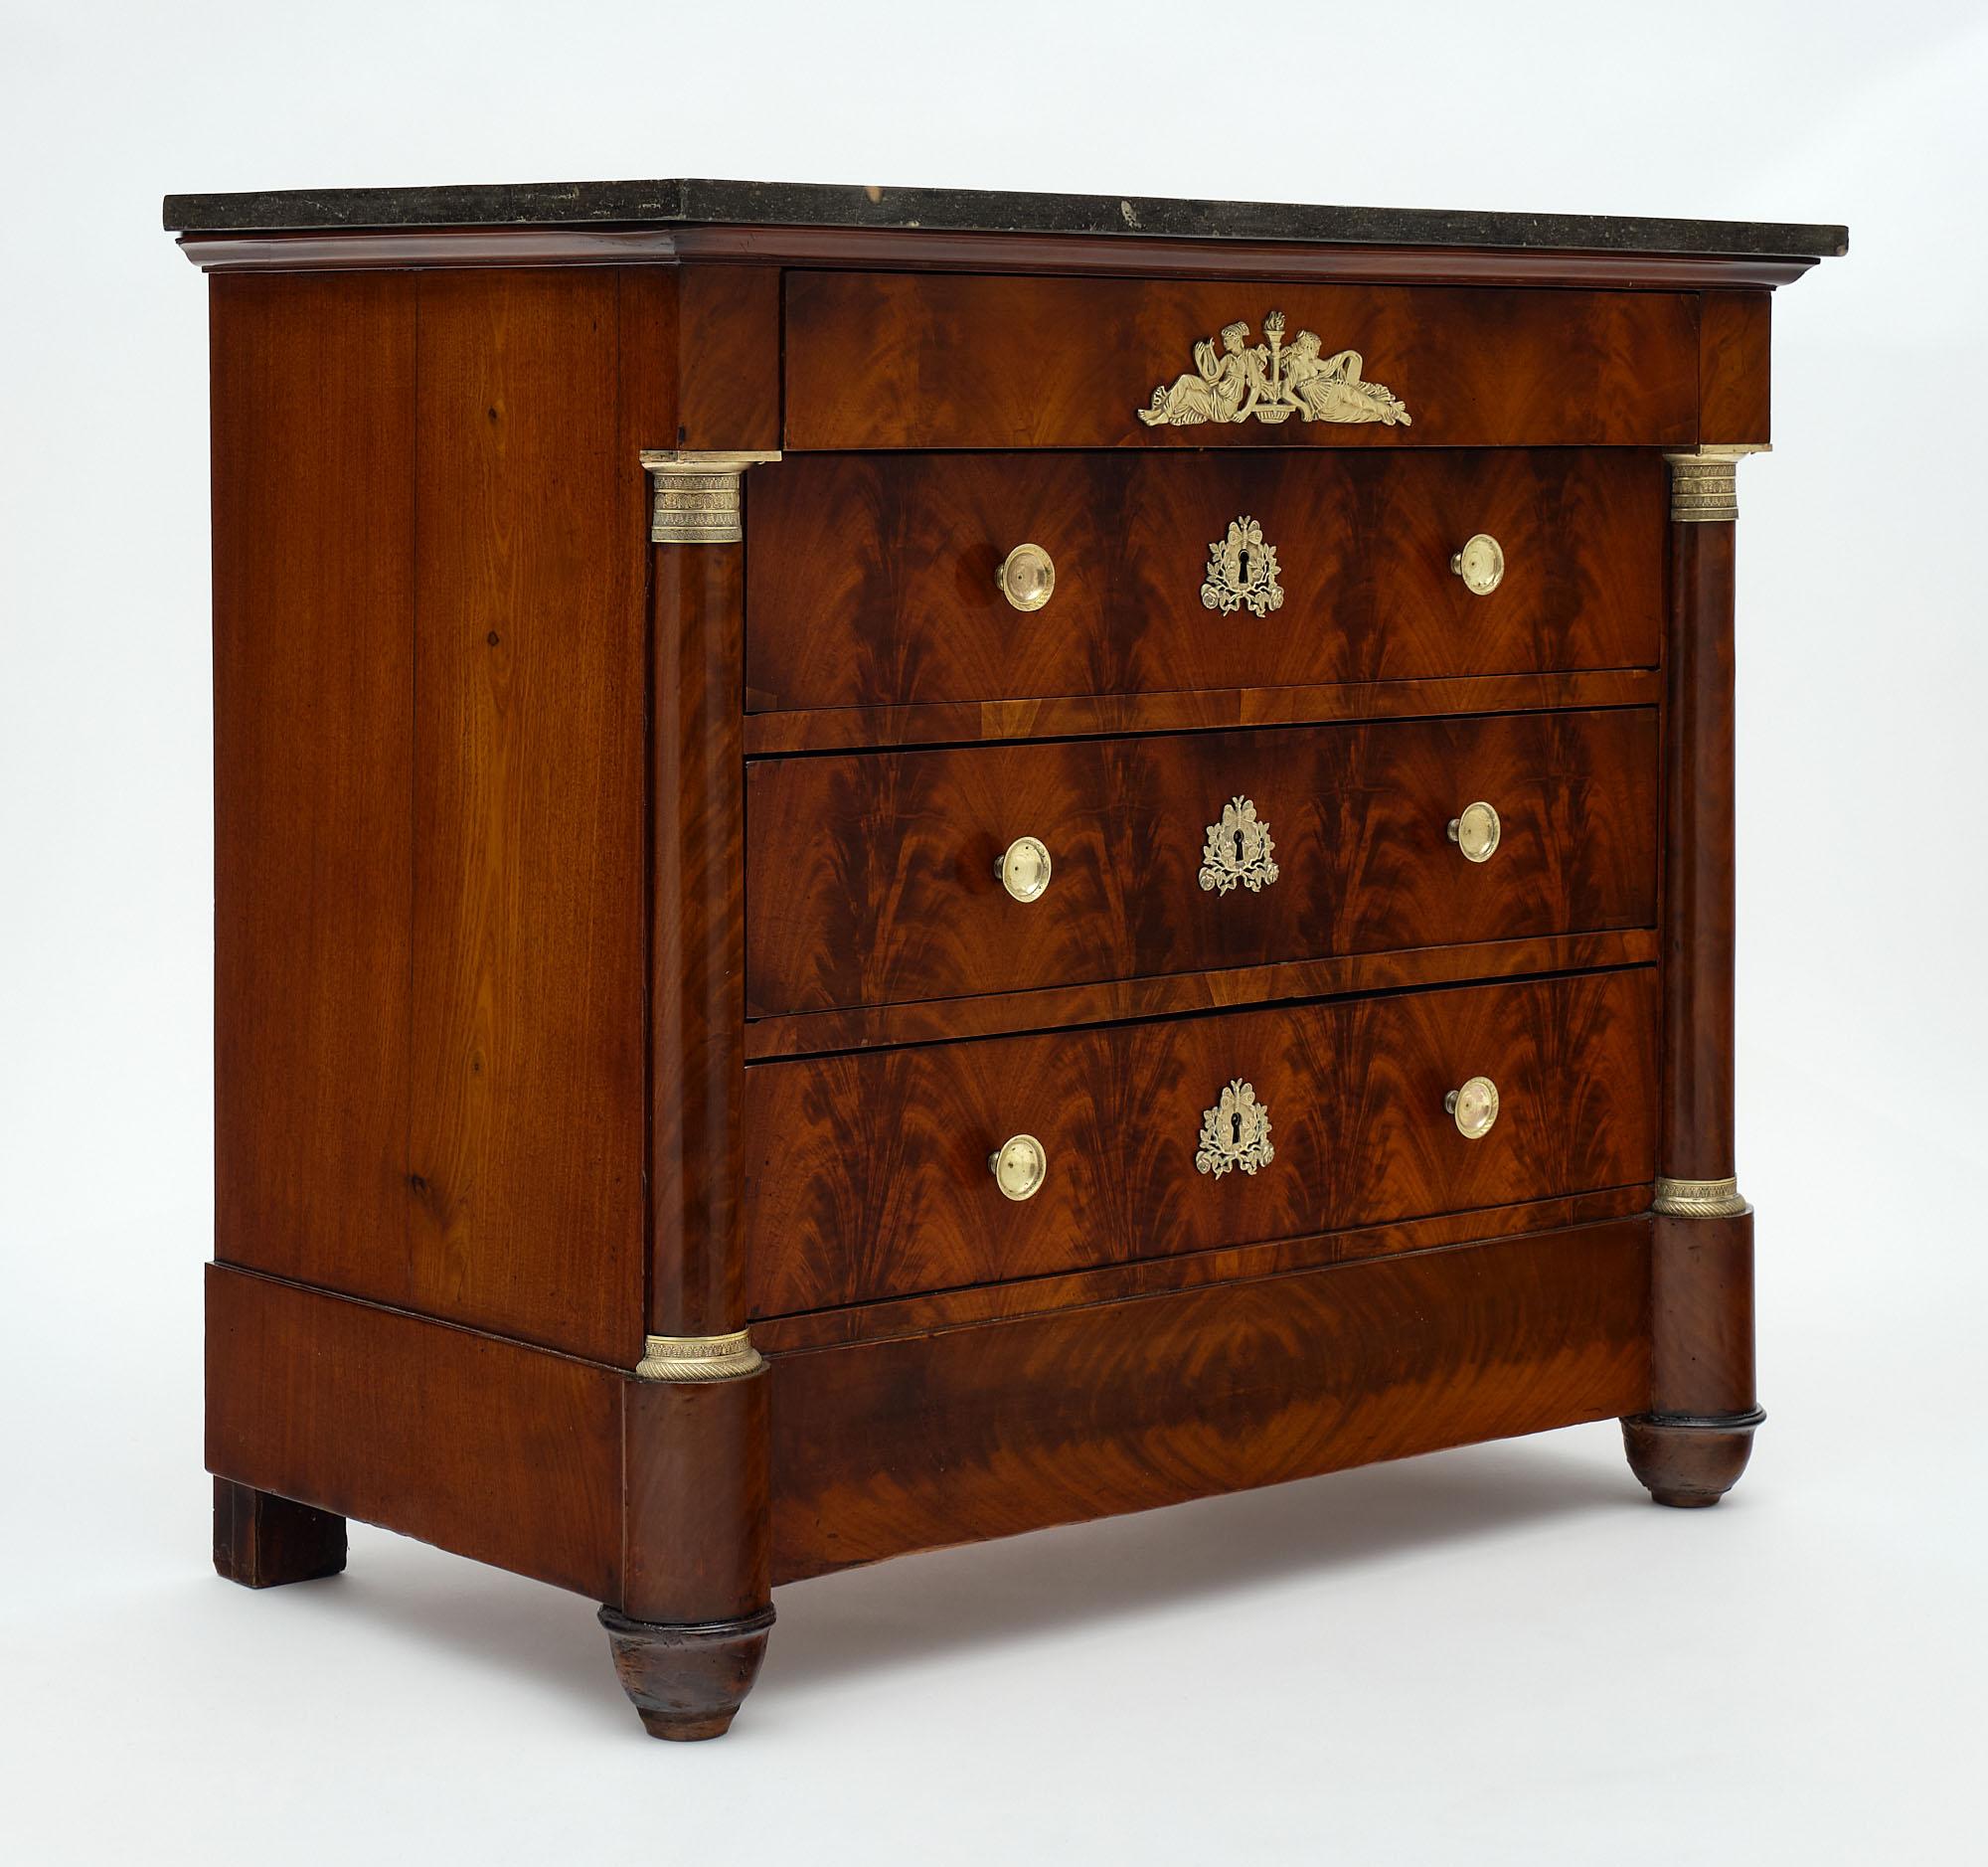 Petite chest of drawers from France made of flamed Cuban mahogany with four dovetailed drawers and a rich array of finely cast bronze hardware. The commode features half detached columns and is finished with a lustrous museum-quality French polish.